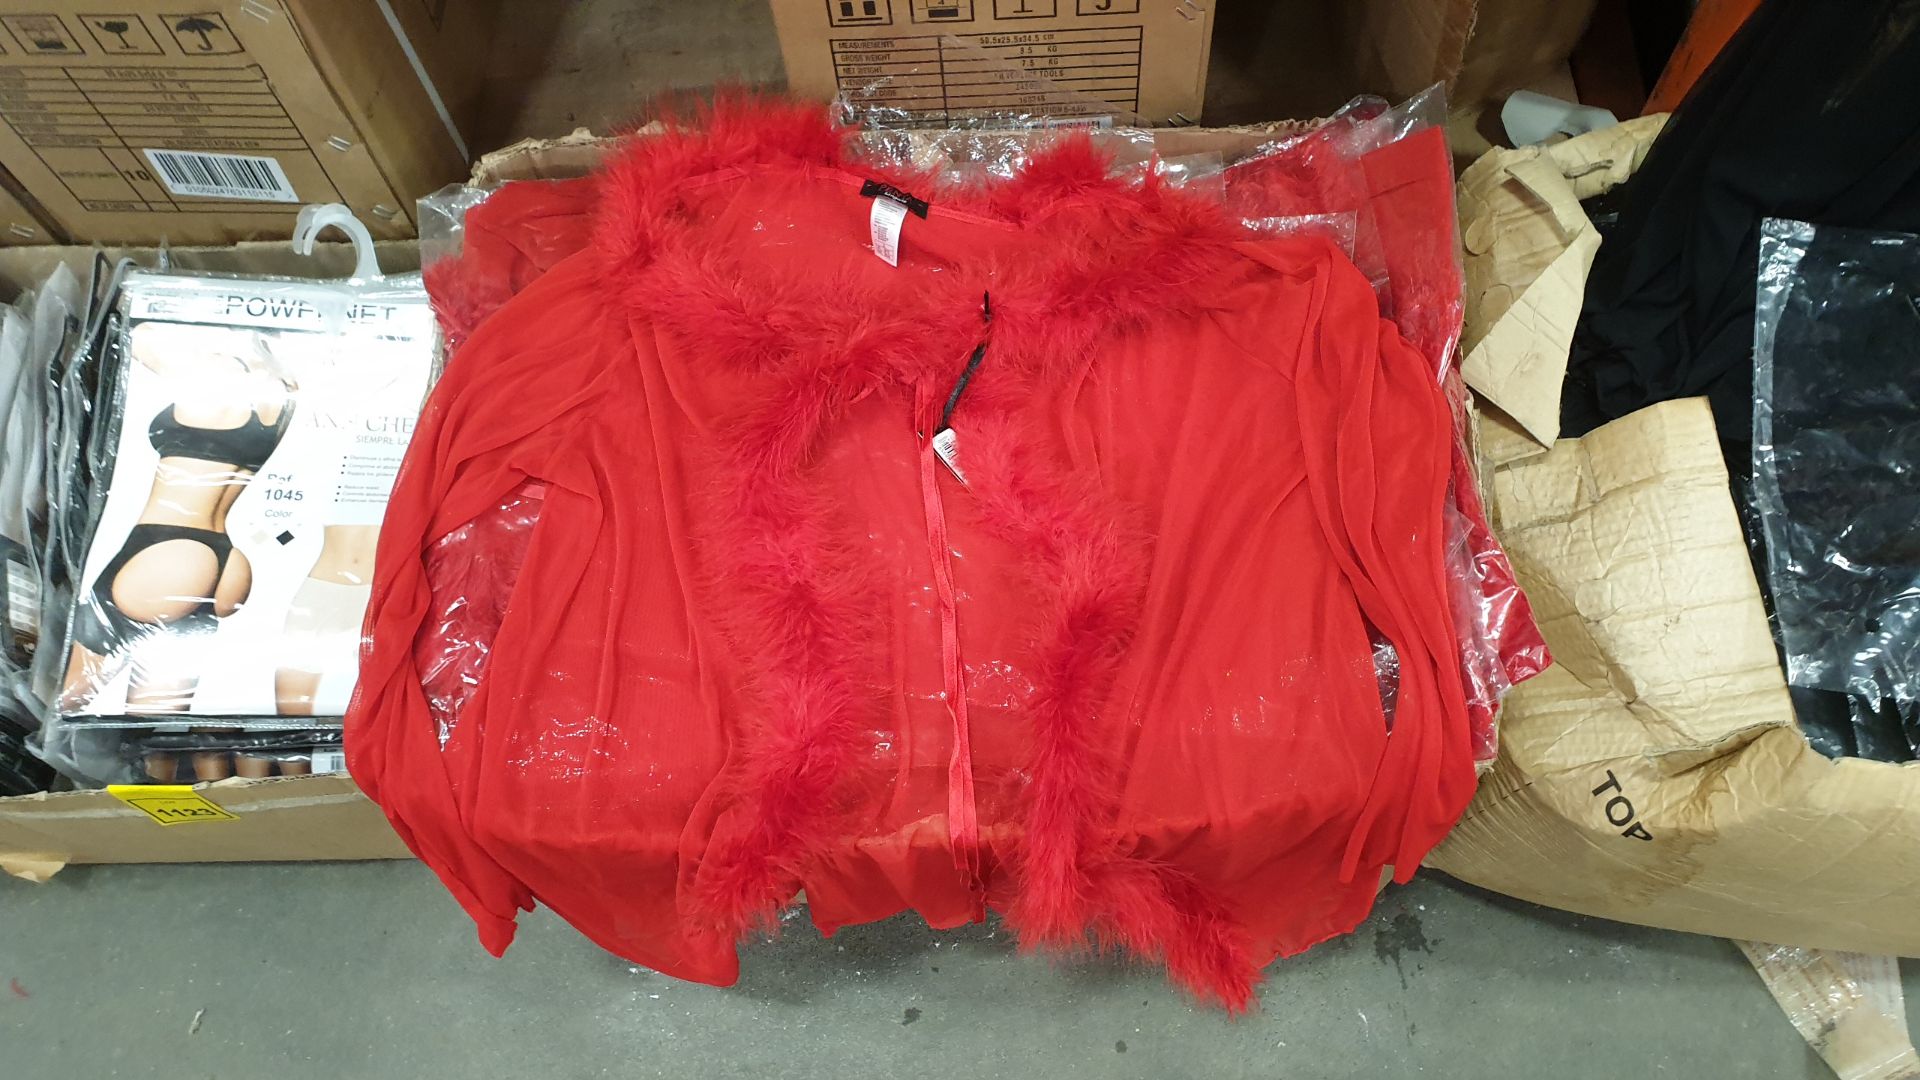 100 X BRAND NEW PENTA LINGERIE RED BABYDOLLS - IN ONE BOX